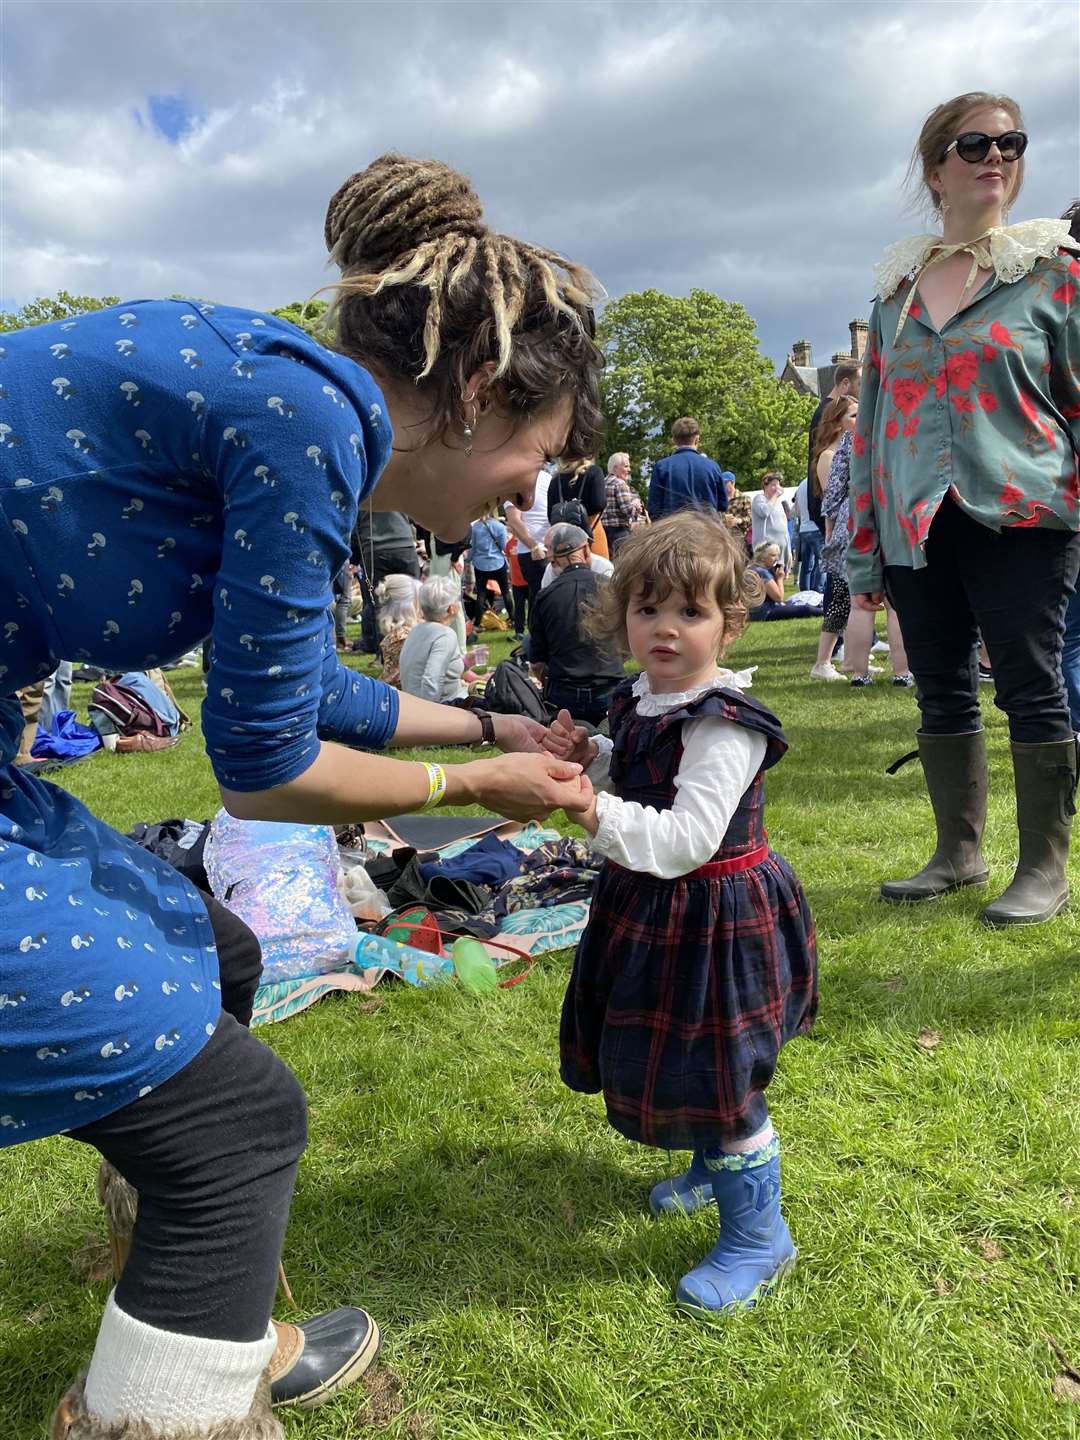 Dancing queens... Ronja Duczek from the Black Isle dances with her goddaughter two-year-old Tabitha Rossi...